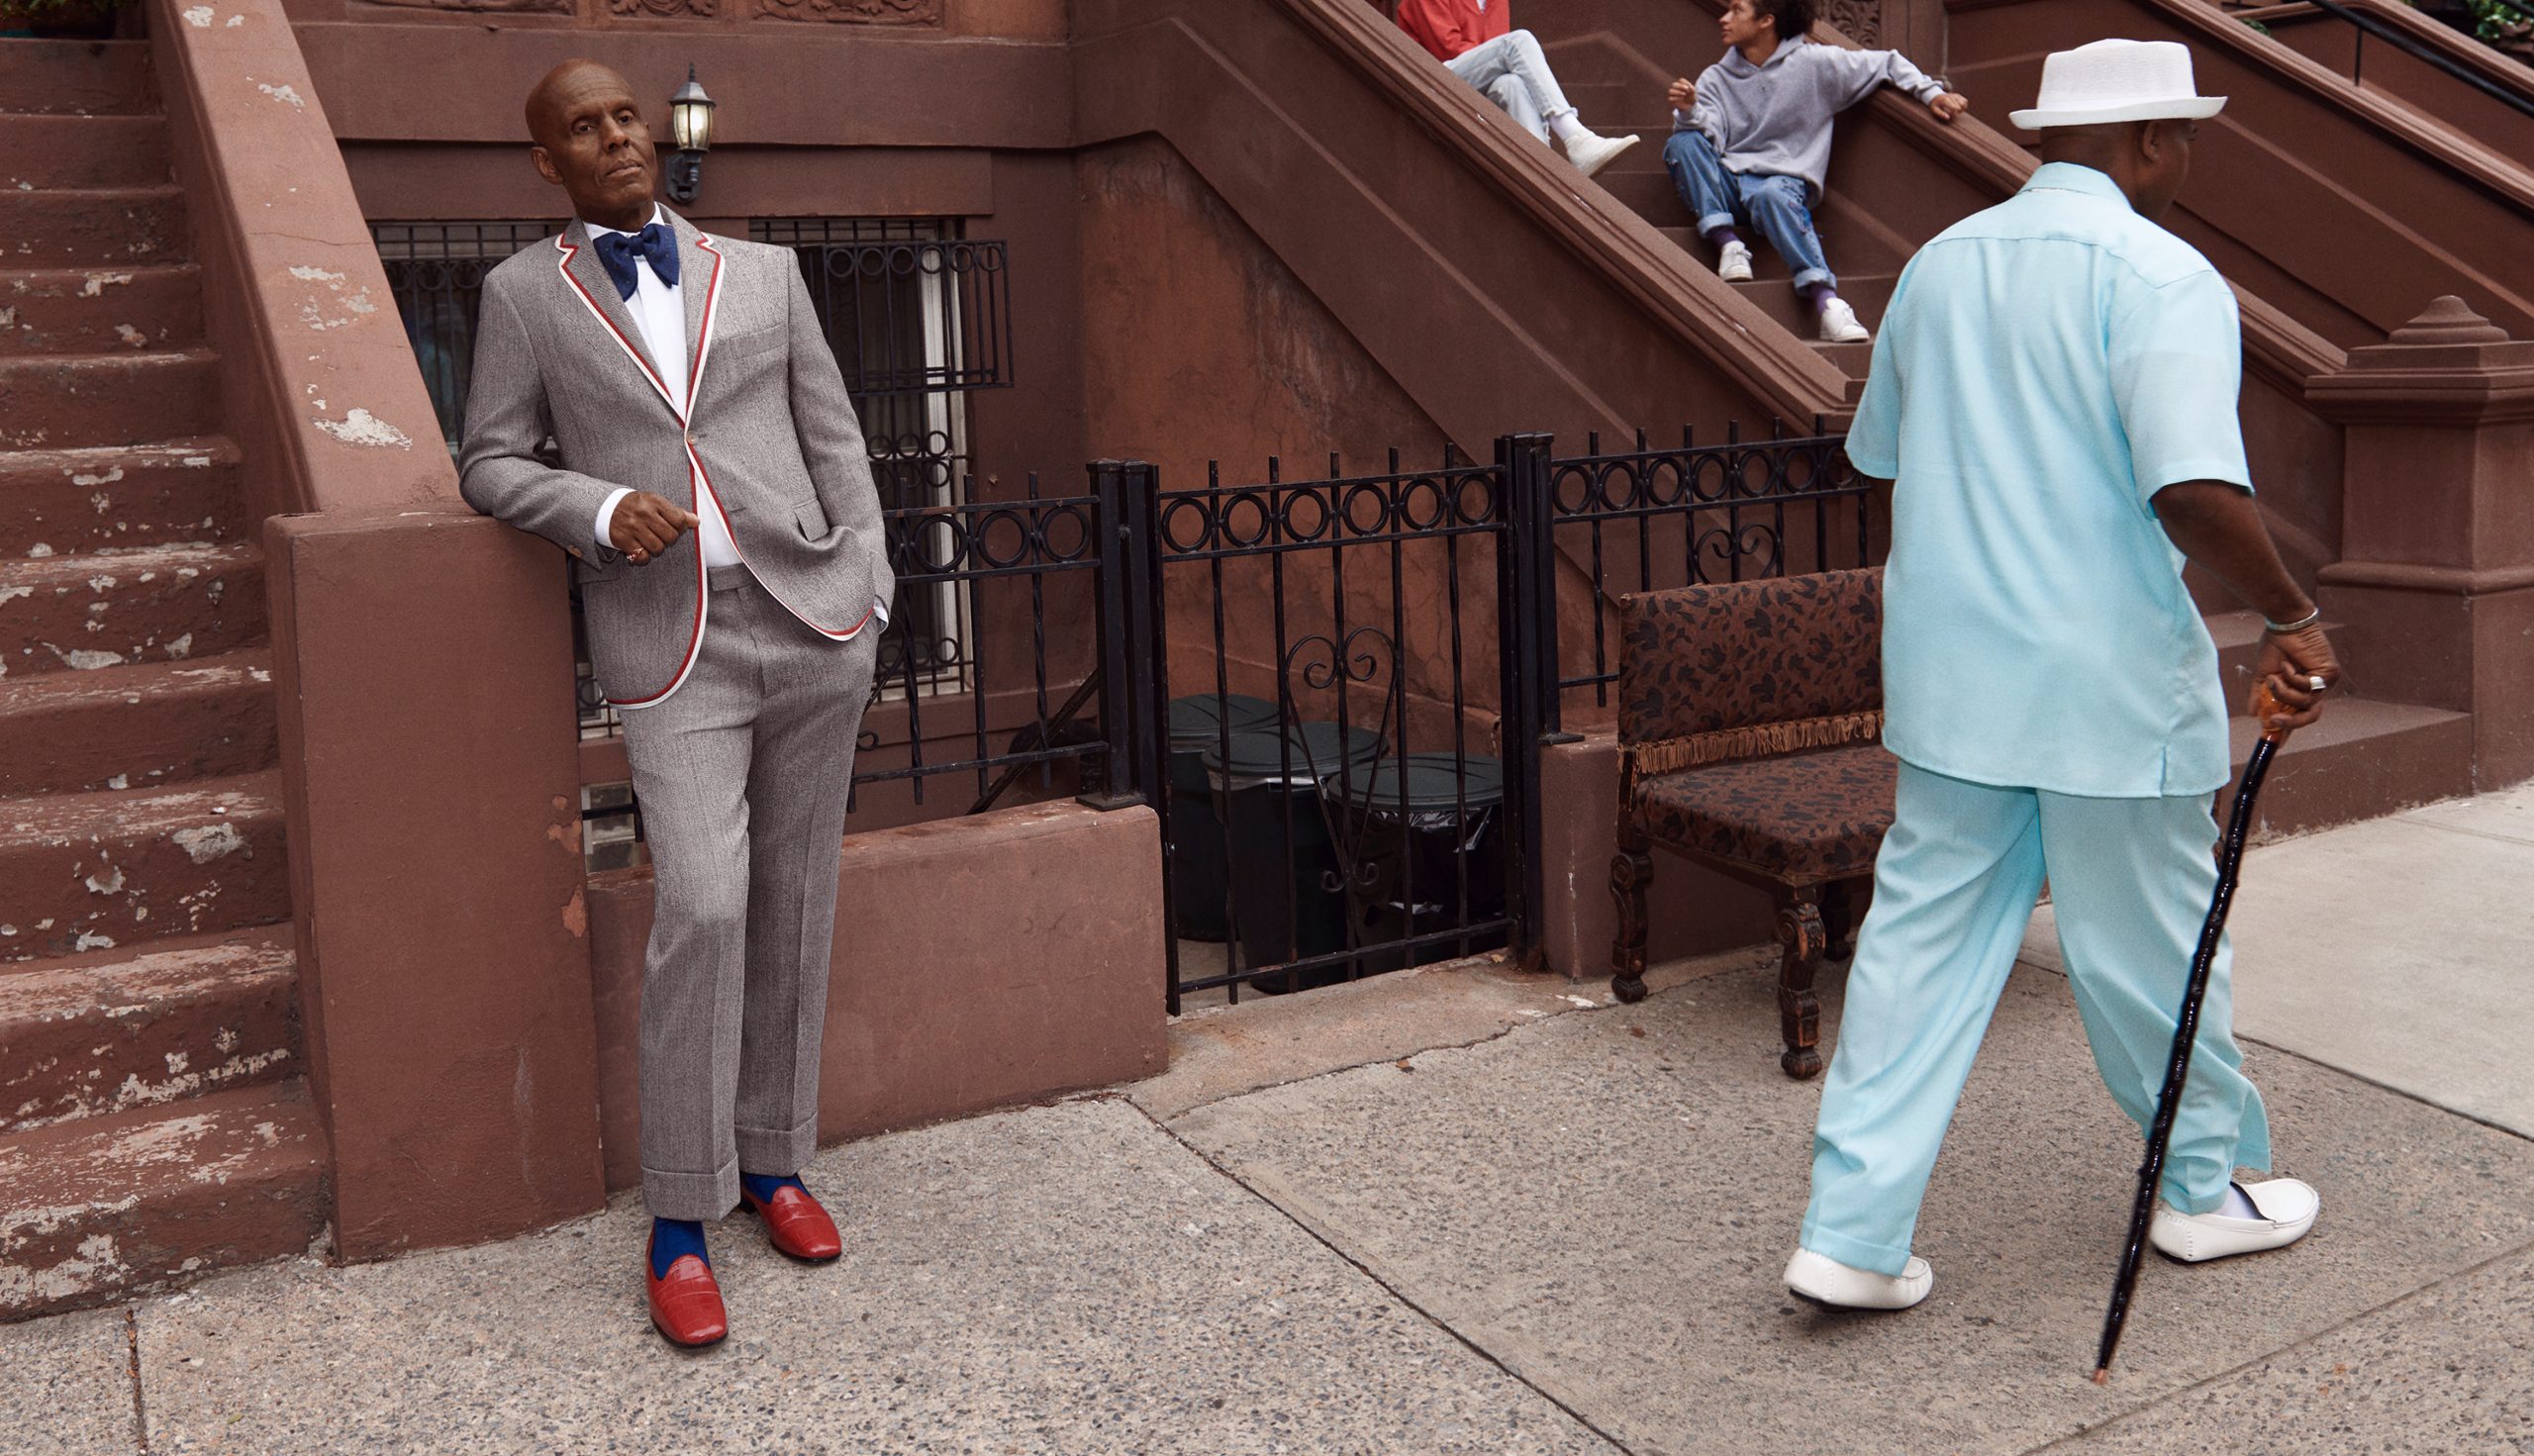 Gucci, Dapper Dan, and How the Fashion Industry Fails Black People